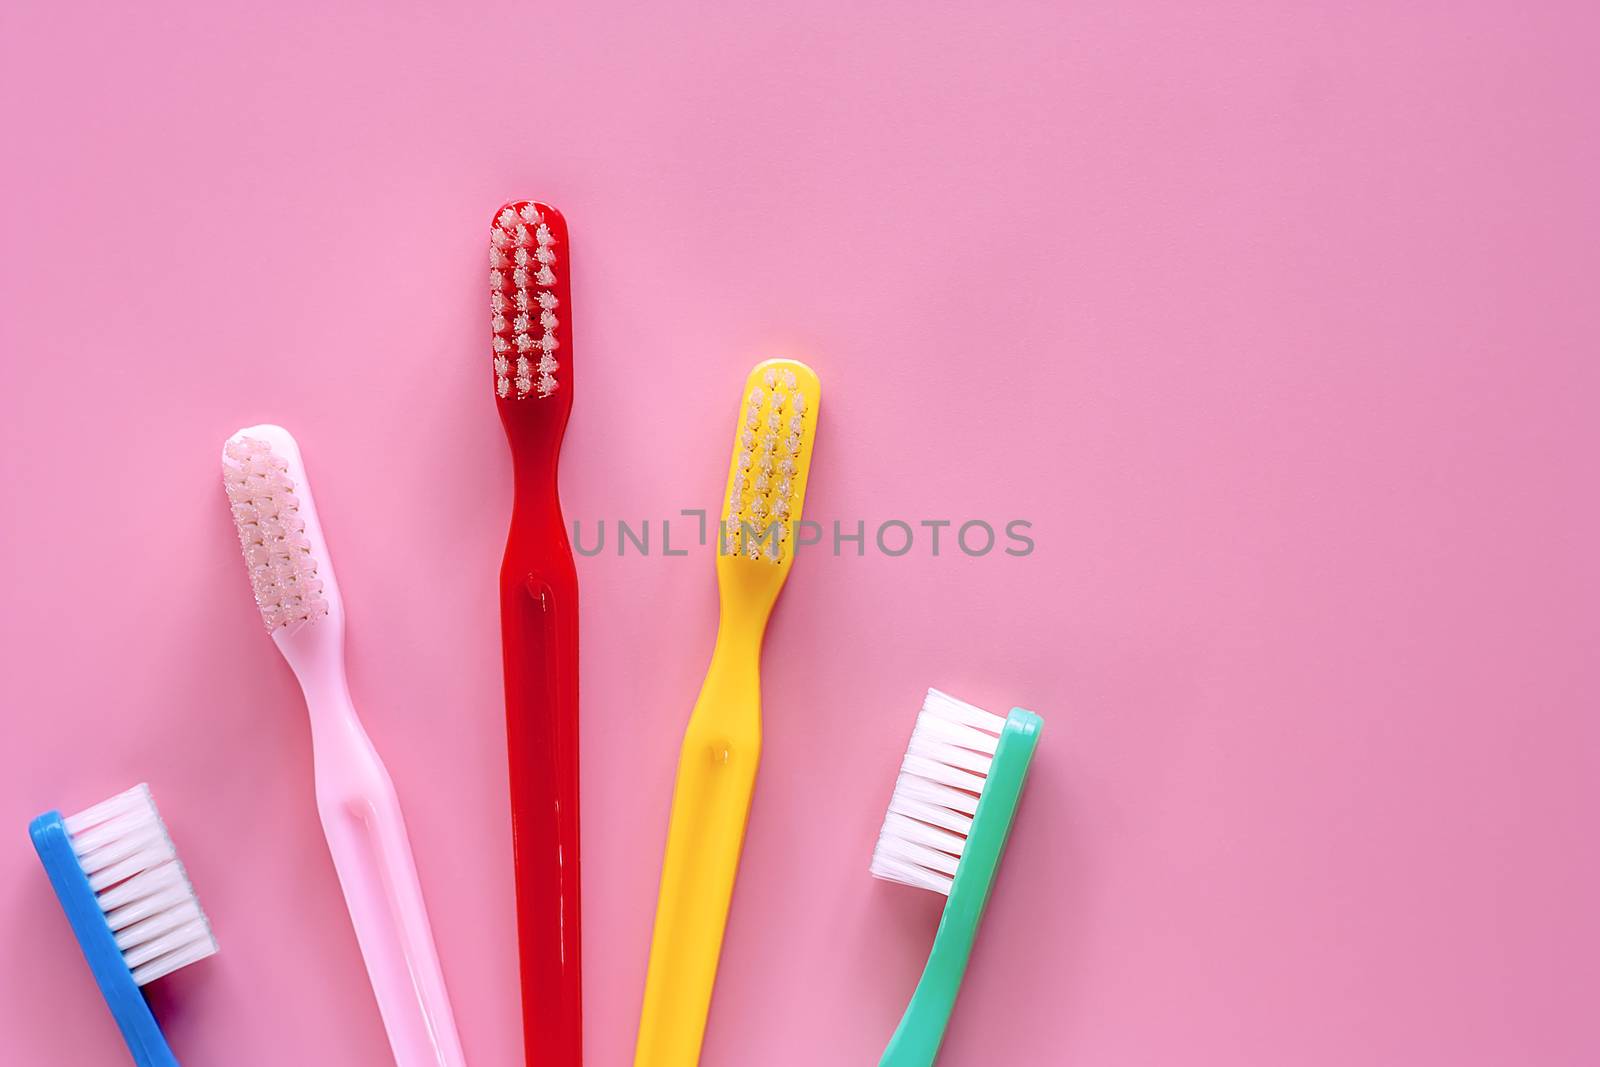 Toothbrush used for cleaning the teeth on pink background for dental care concept